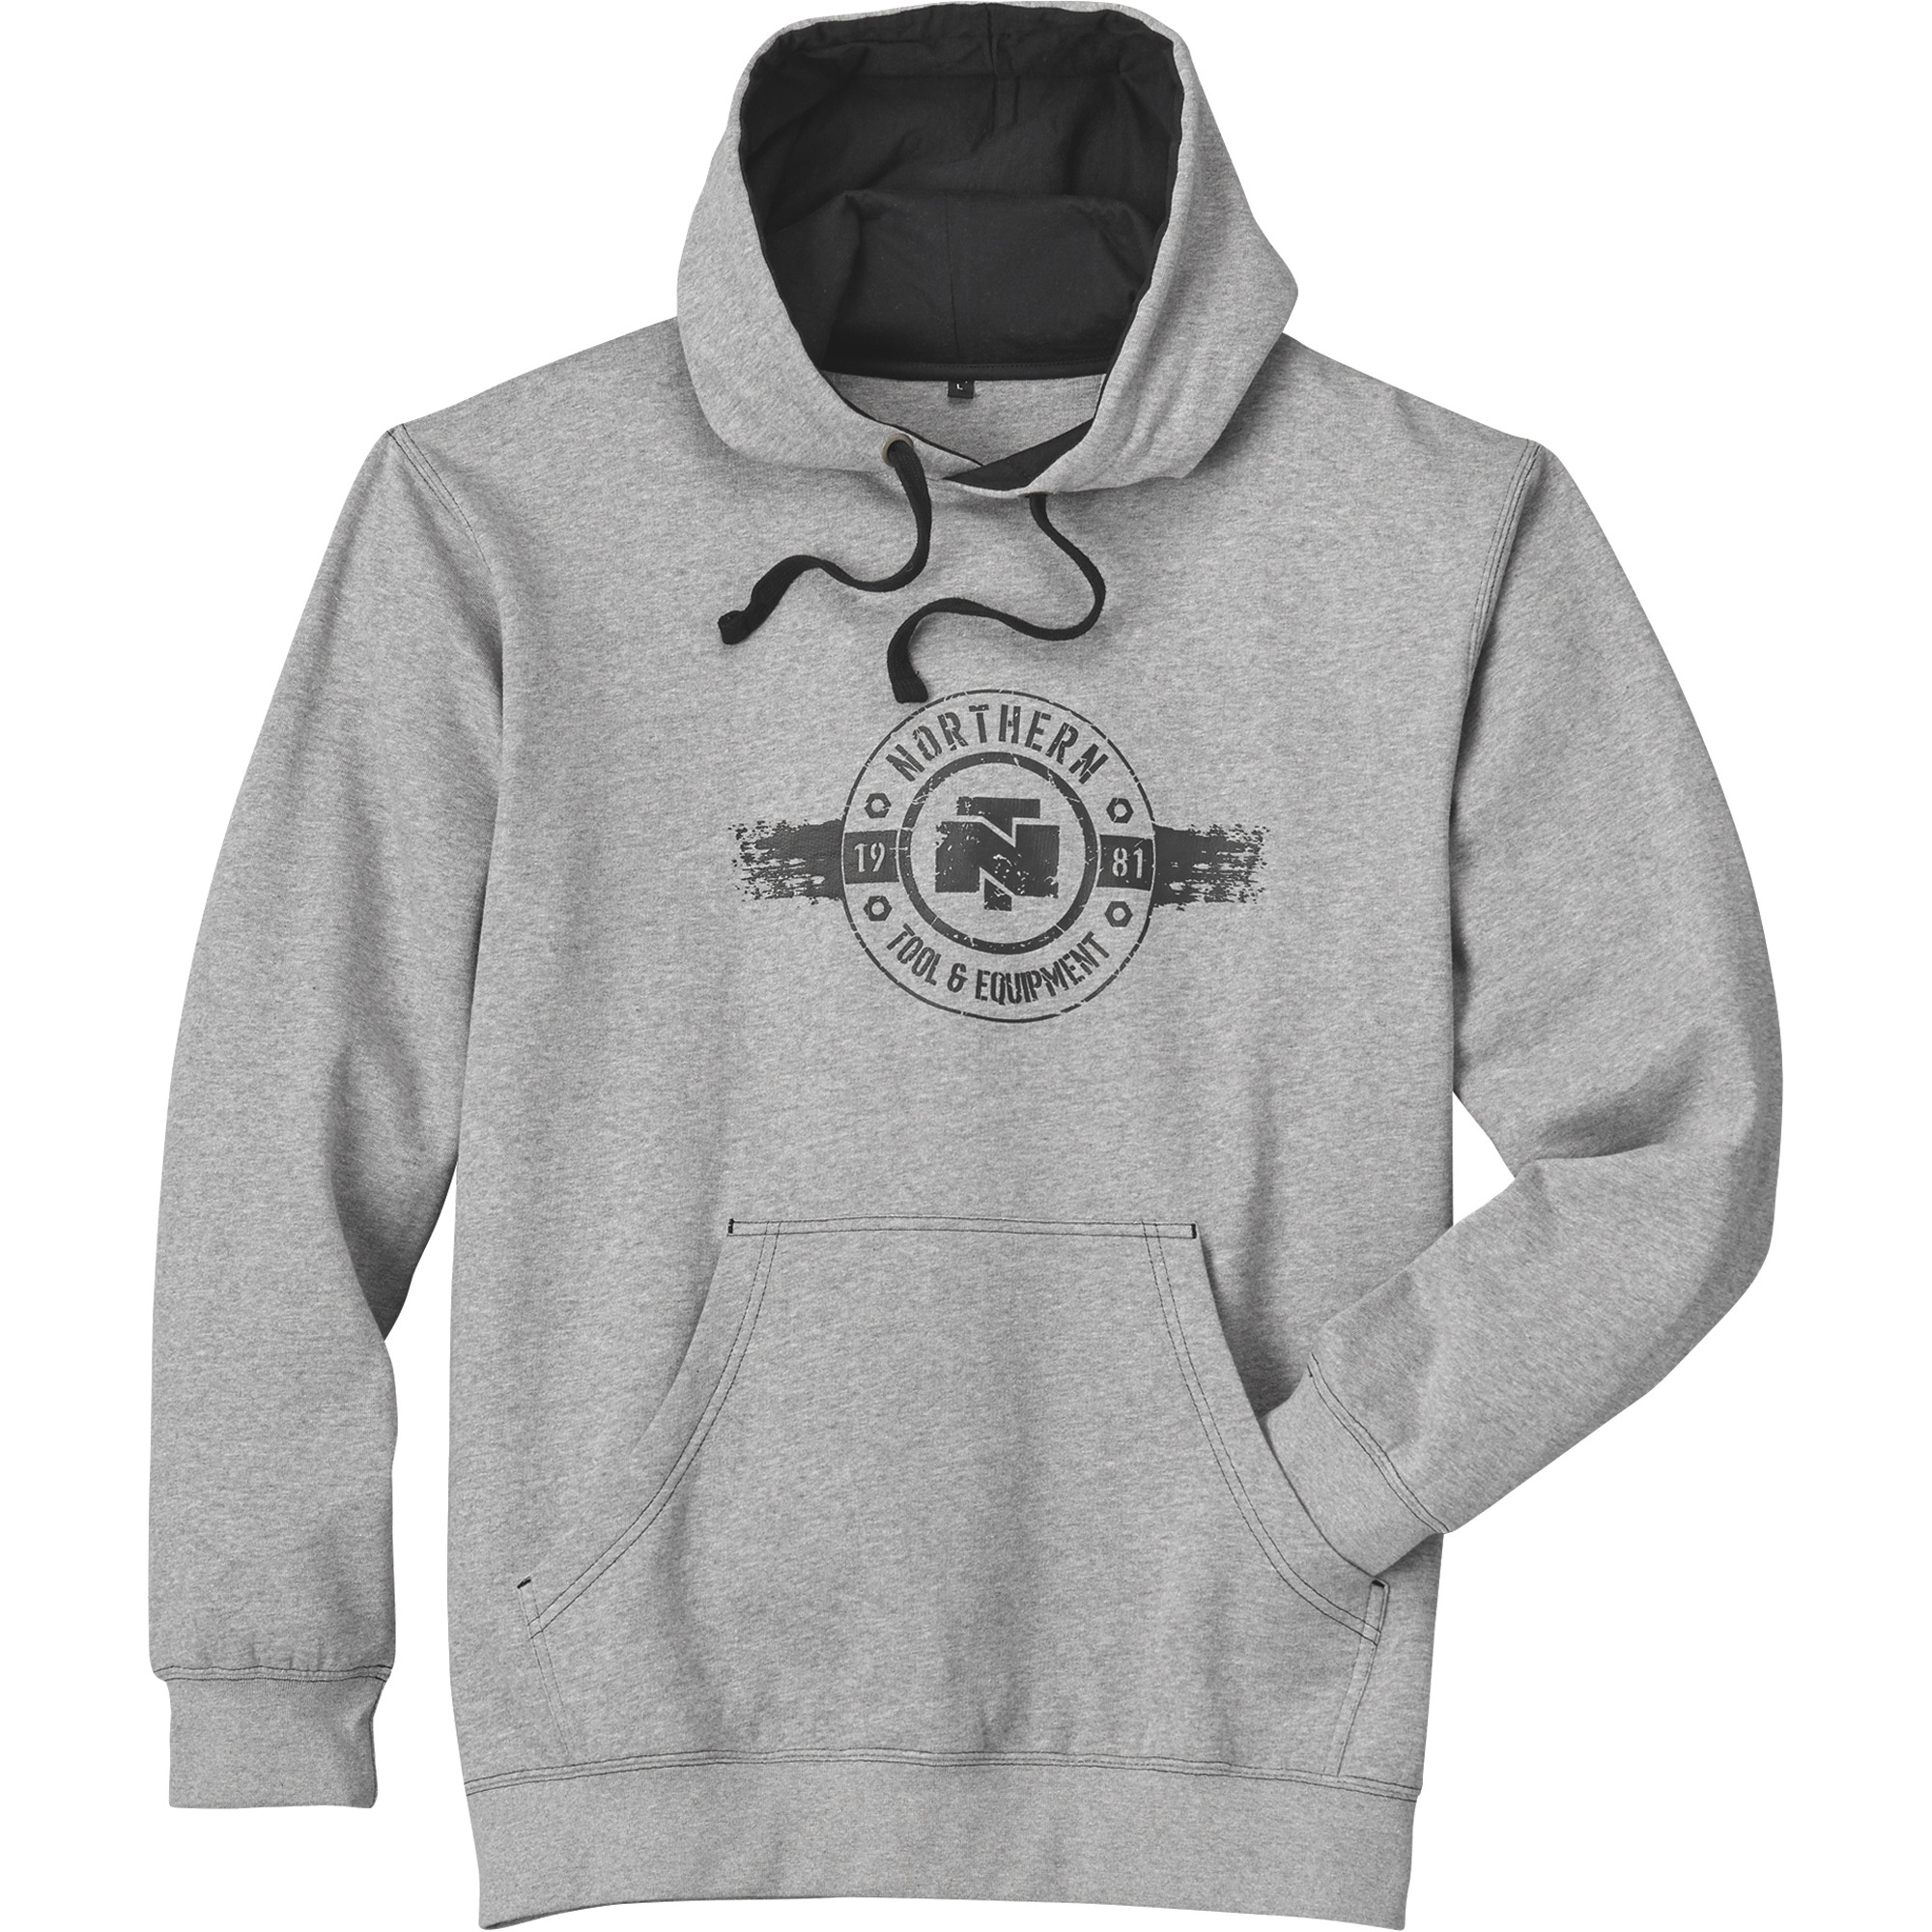 Gravel Gear Men's Pullover Hoodie with NTE Graphics â Gray, Large